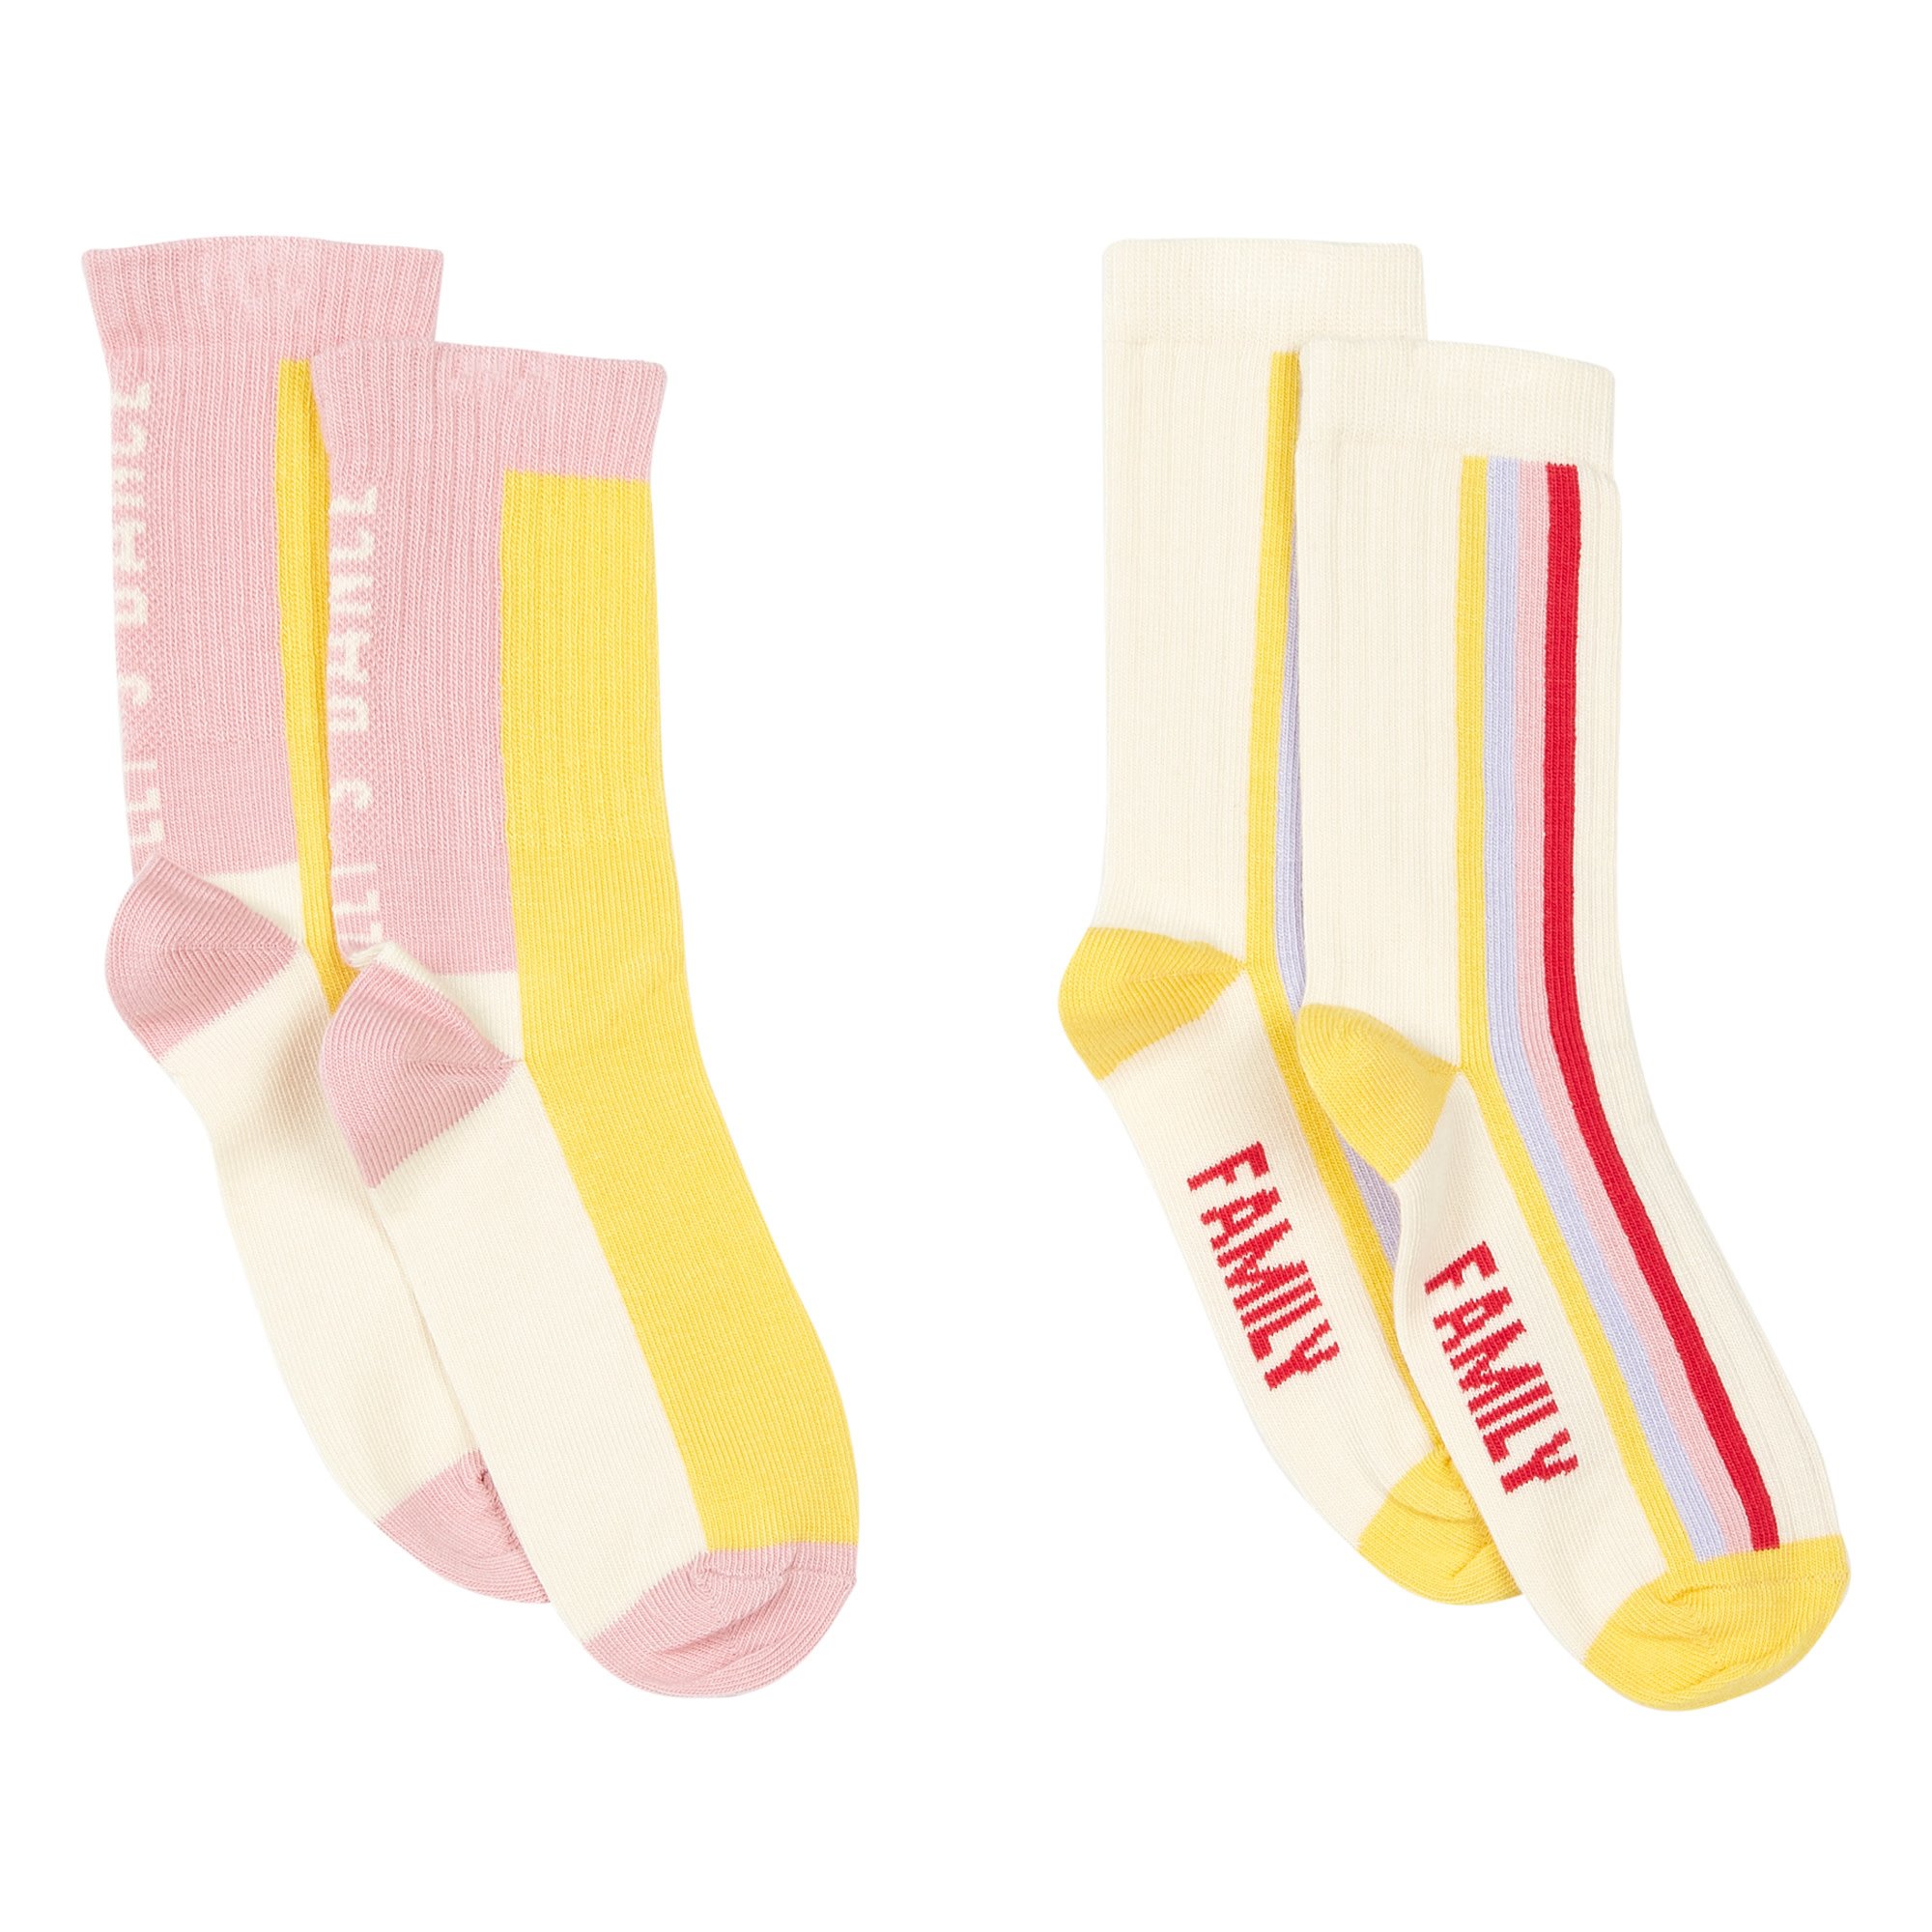 Hundred Pieces Hundred Pieces - 2 Pack Socks